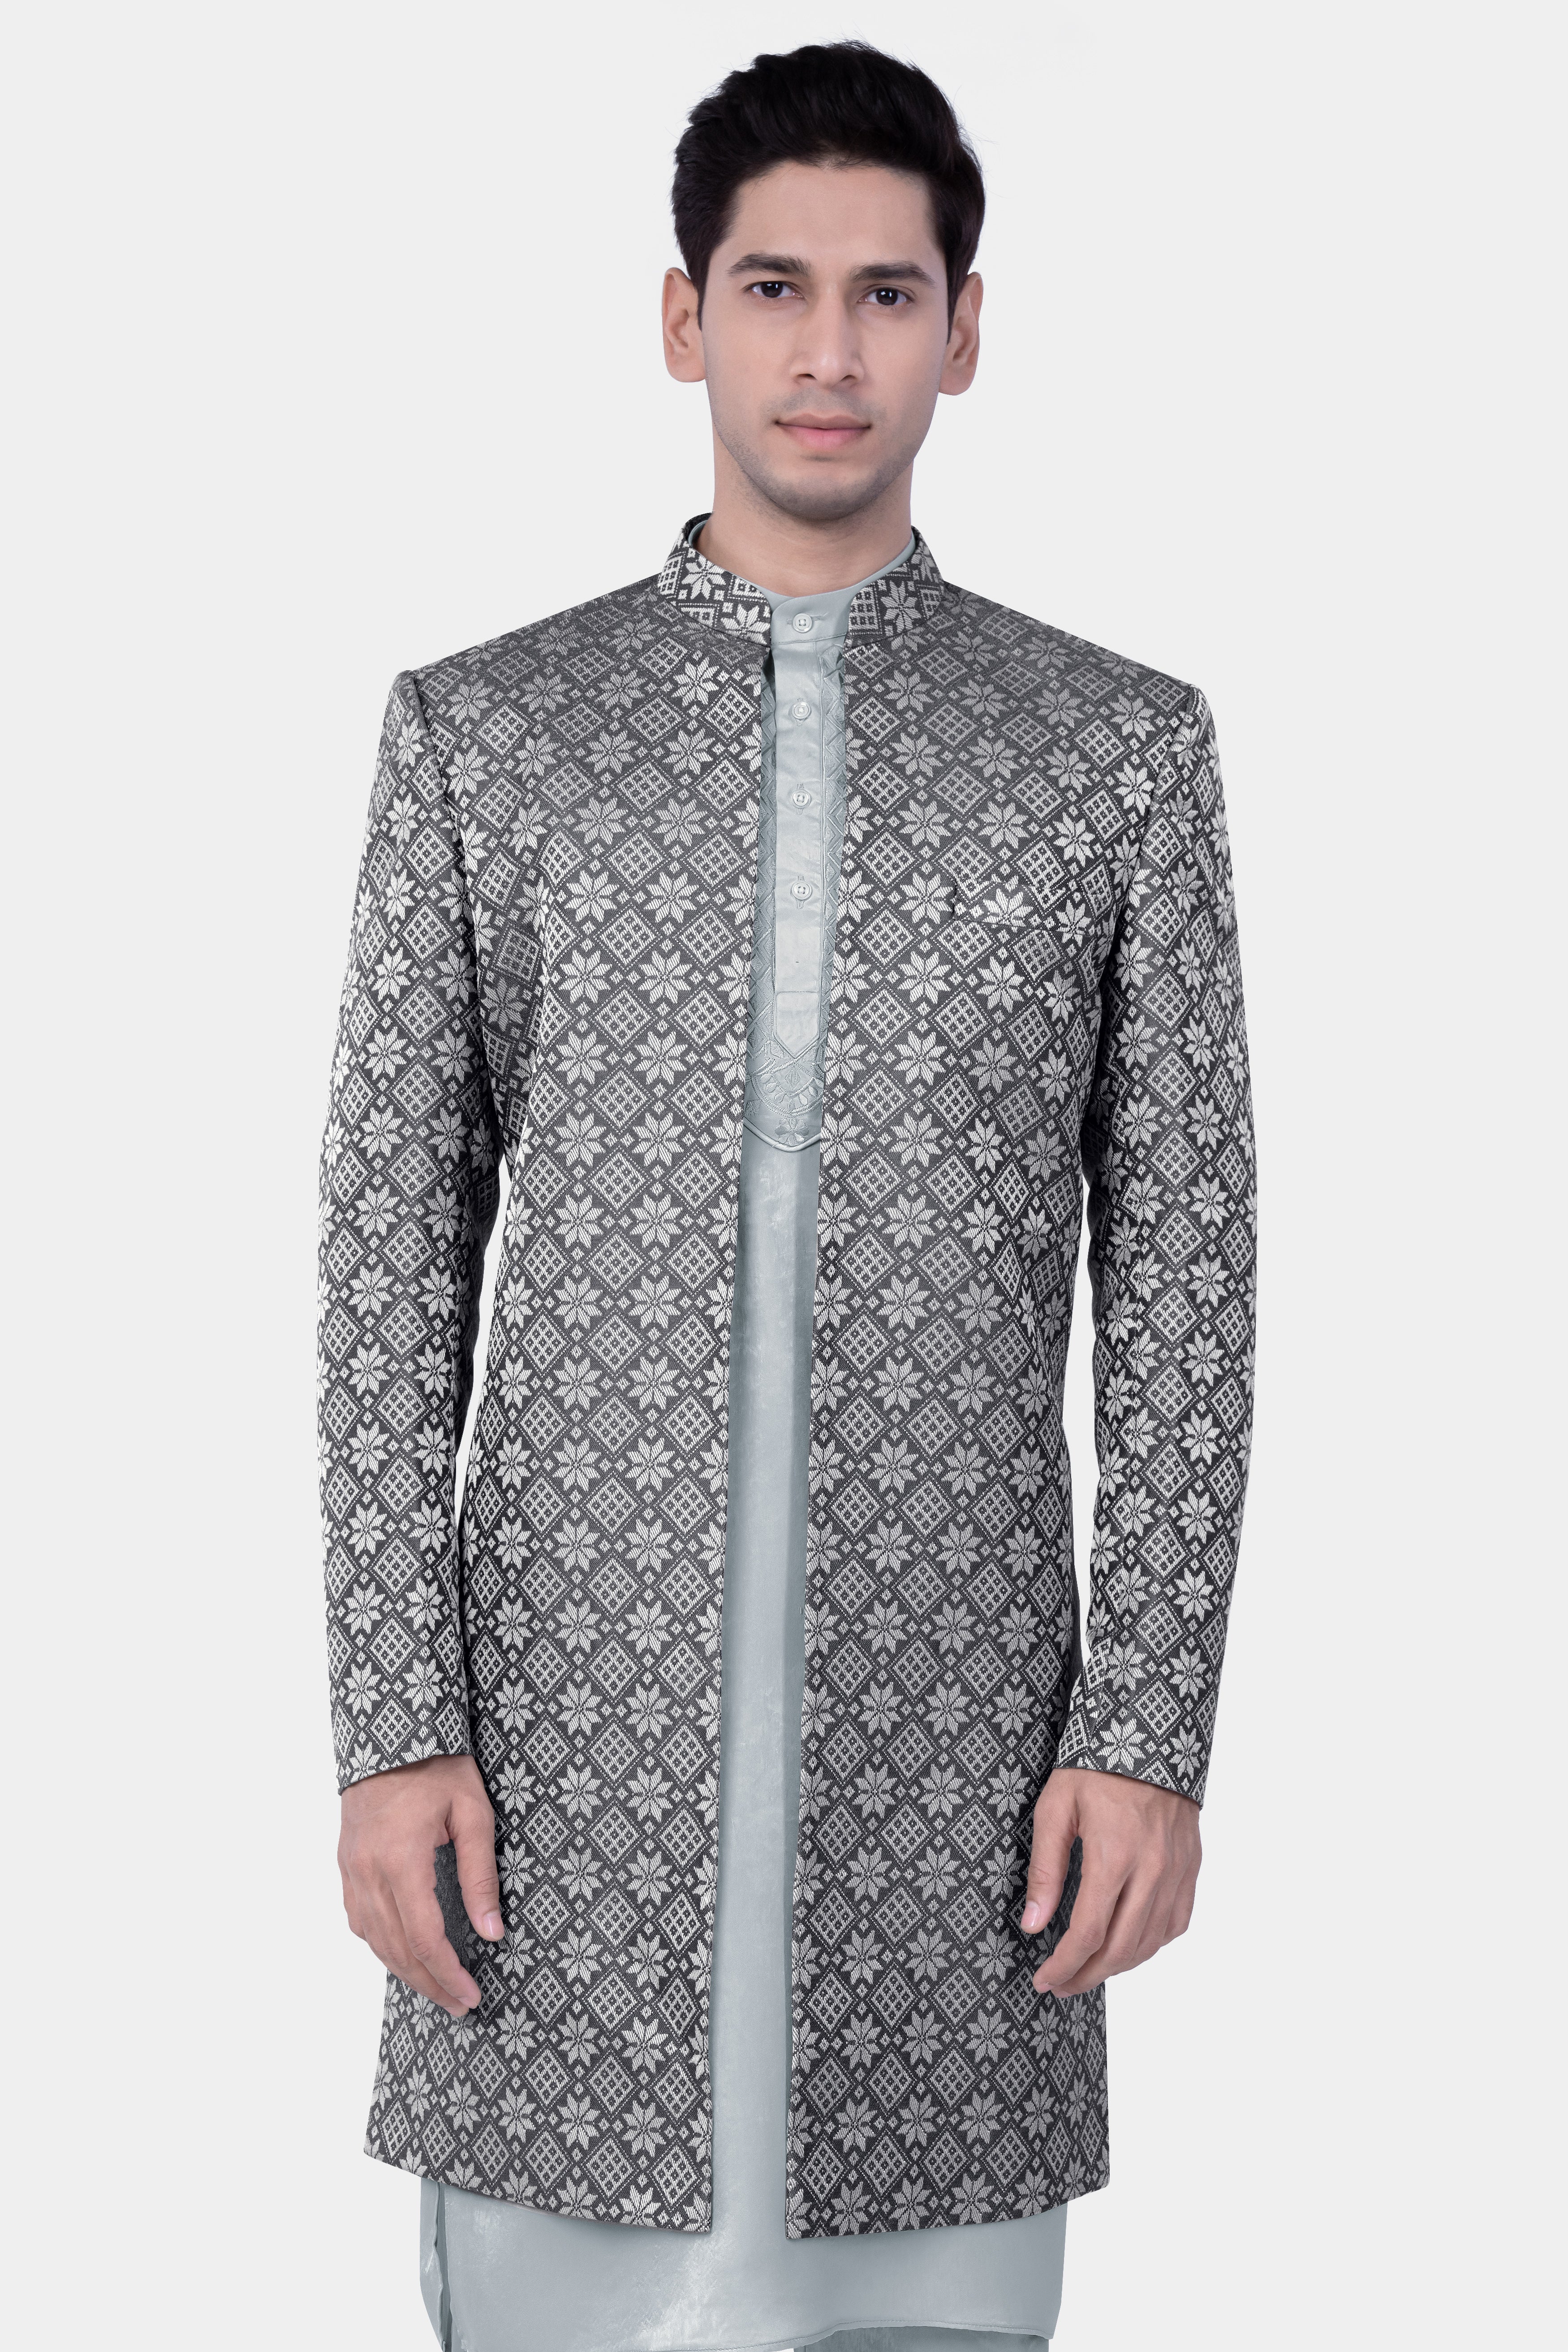 Gravel Gray Jacquard Party Wear Indo-Western Set